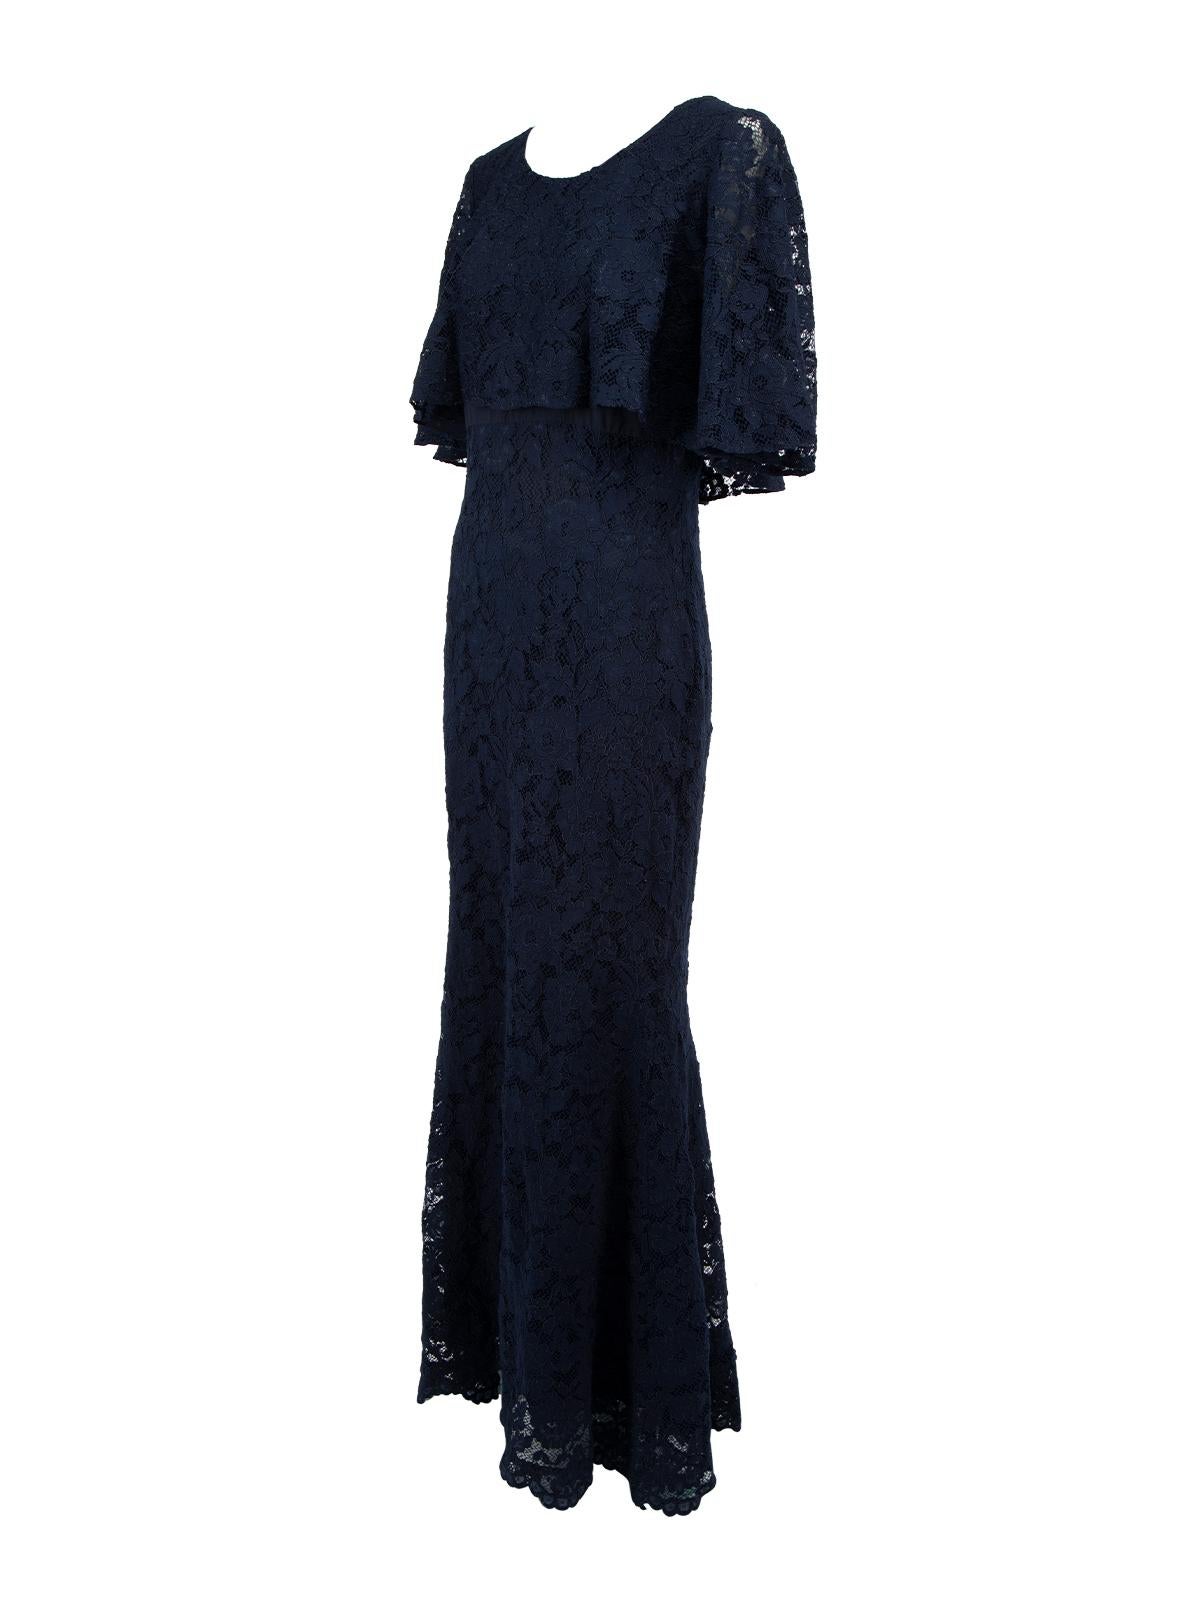 Pre-Loved Badgley Mischka Women's Navy Blue Lace Maxi Dress In Excellent Condition In London, GB